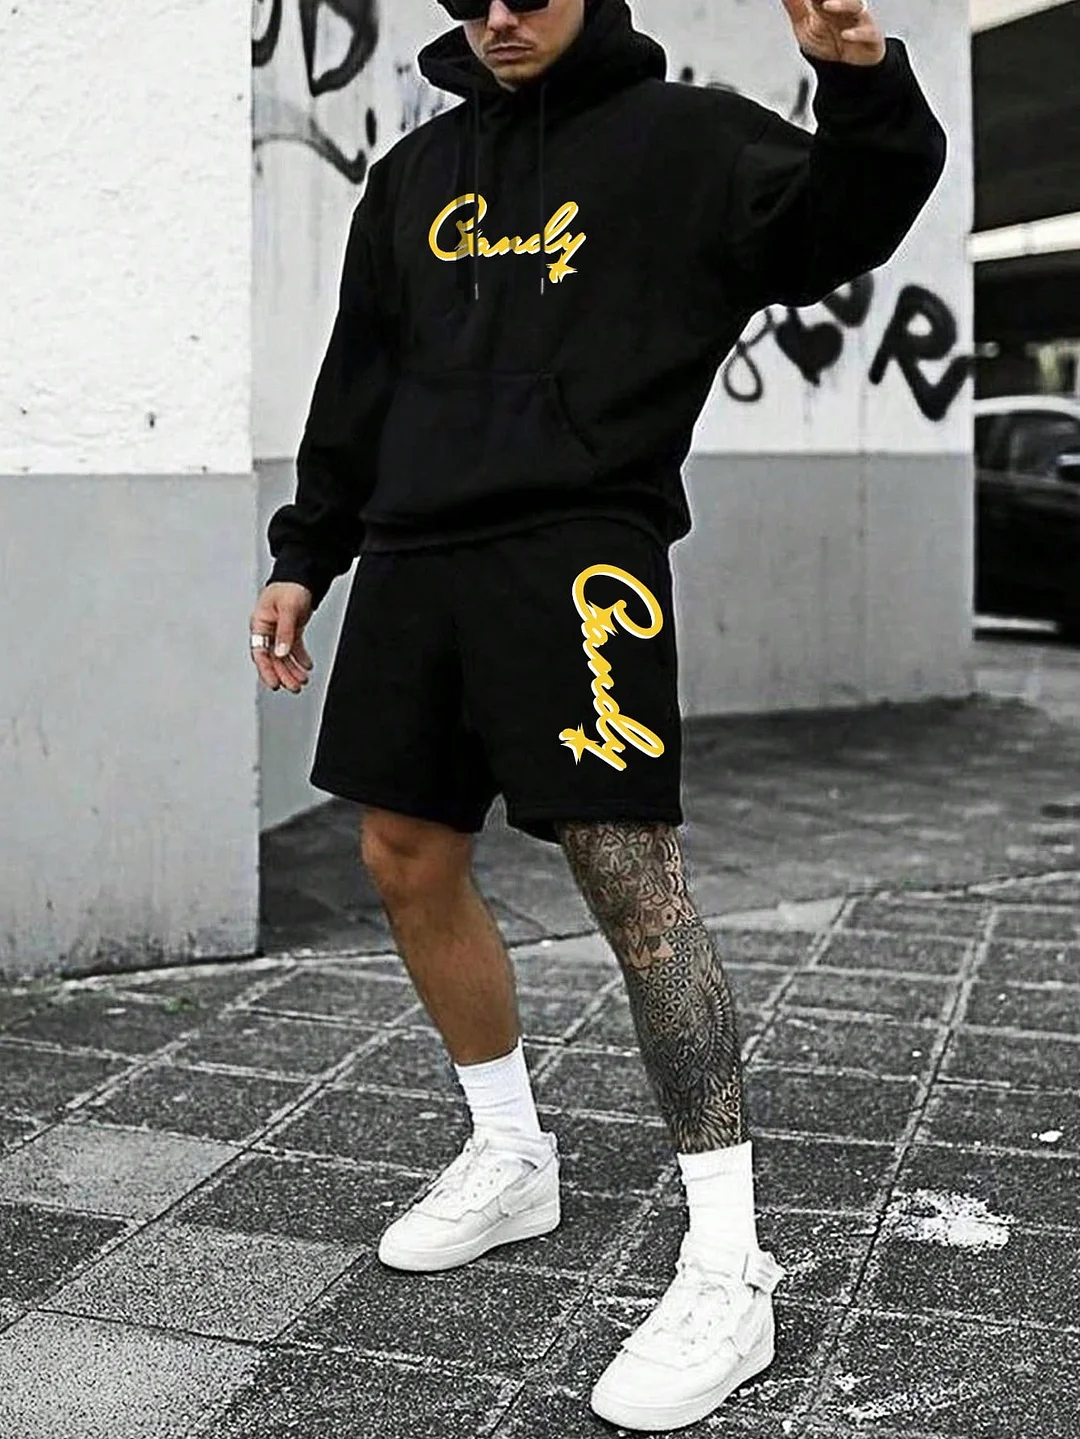 Lovely Letter Printed Hoodie and Shorts Black Suit